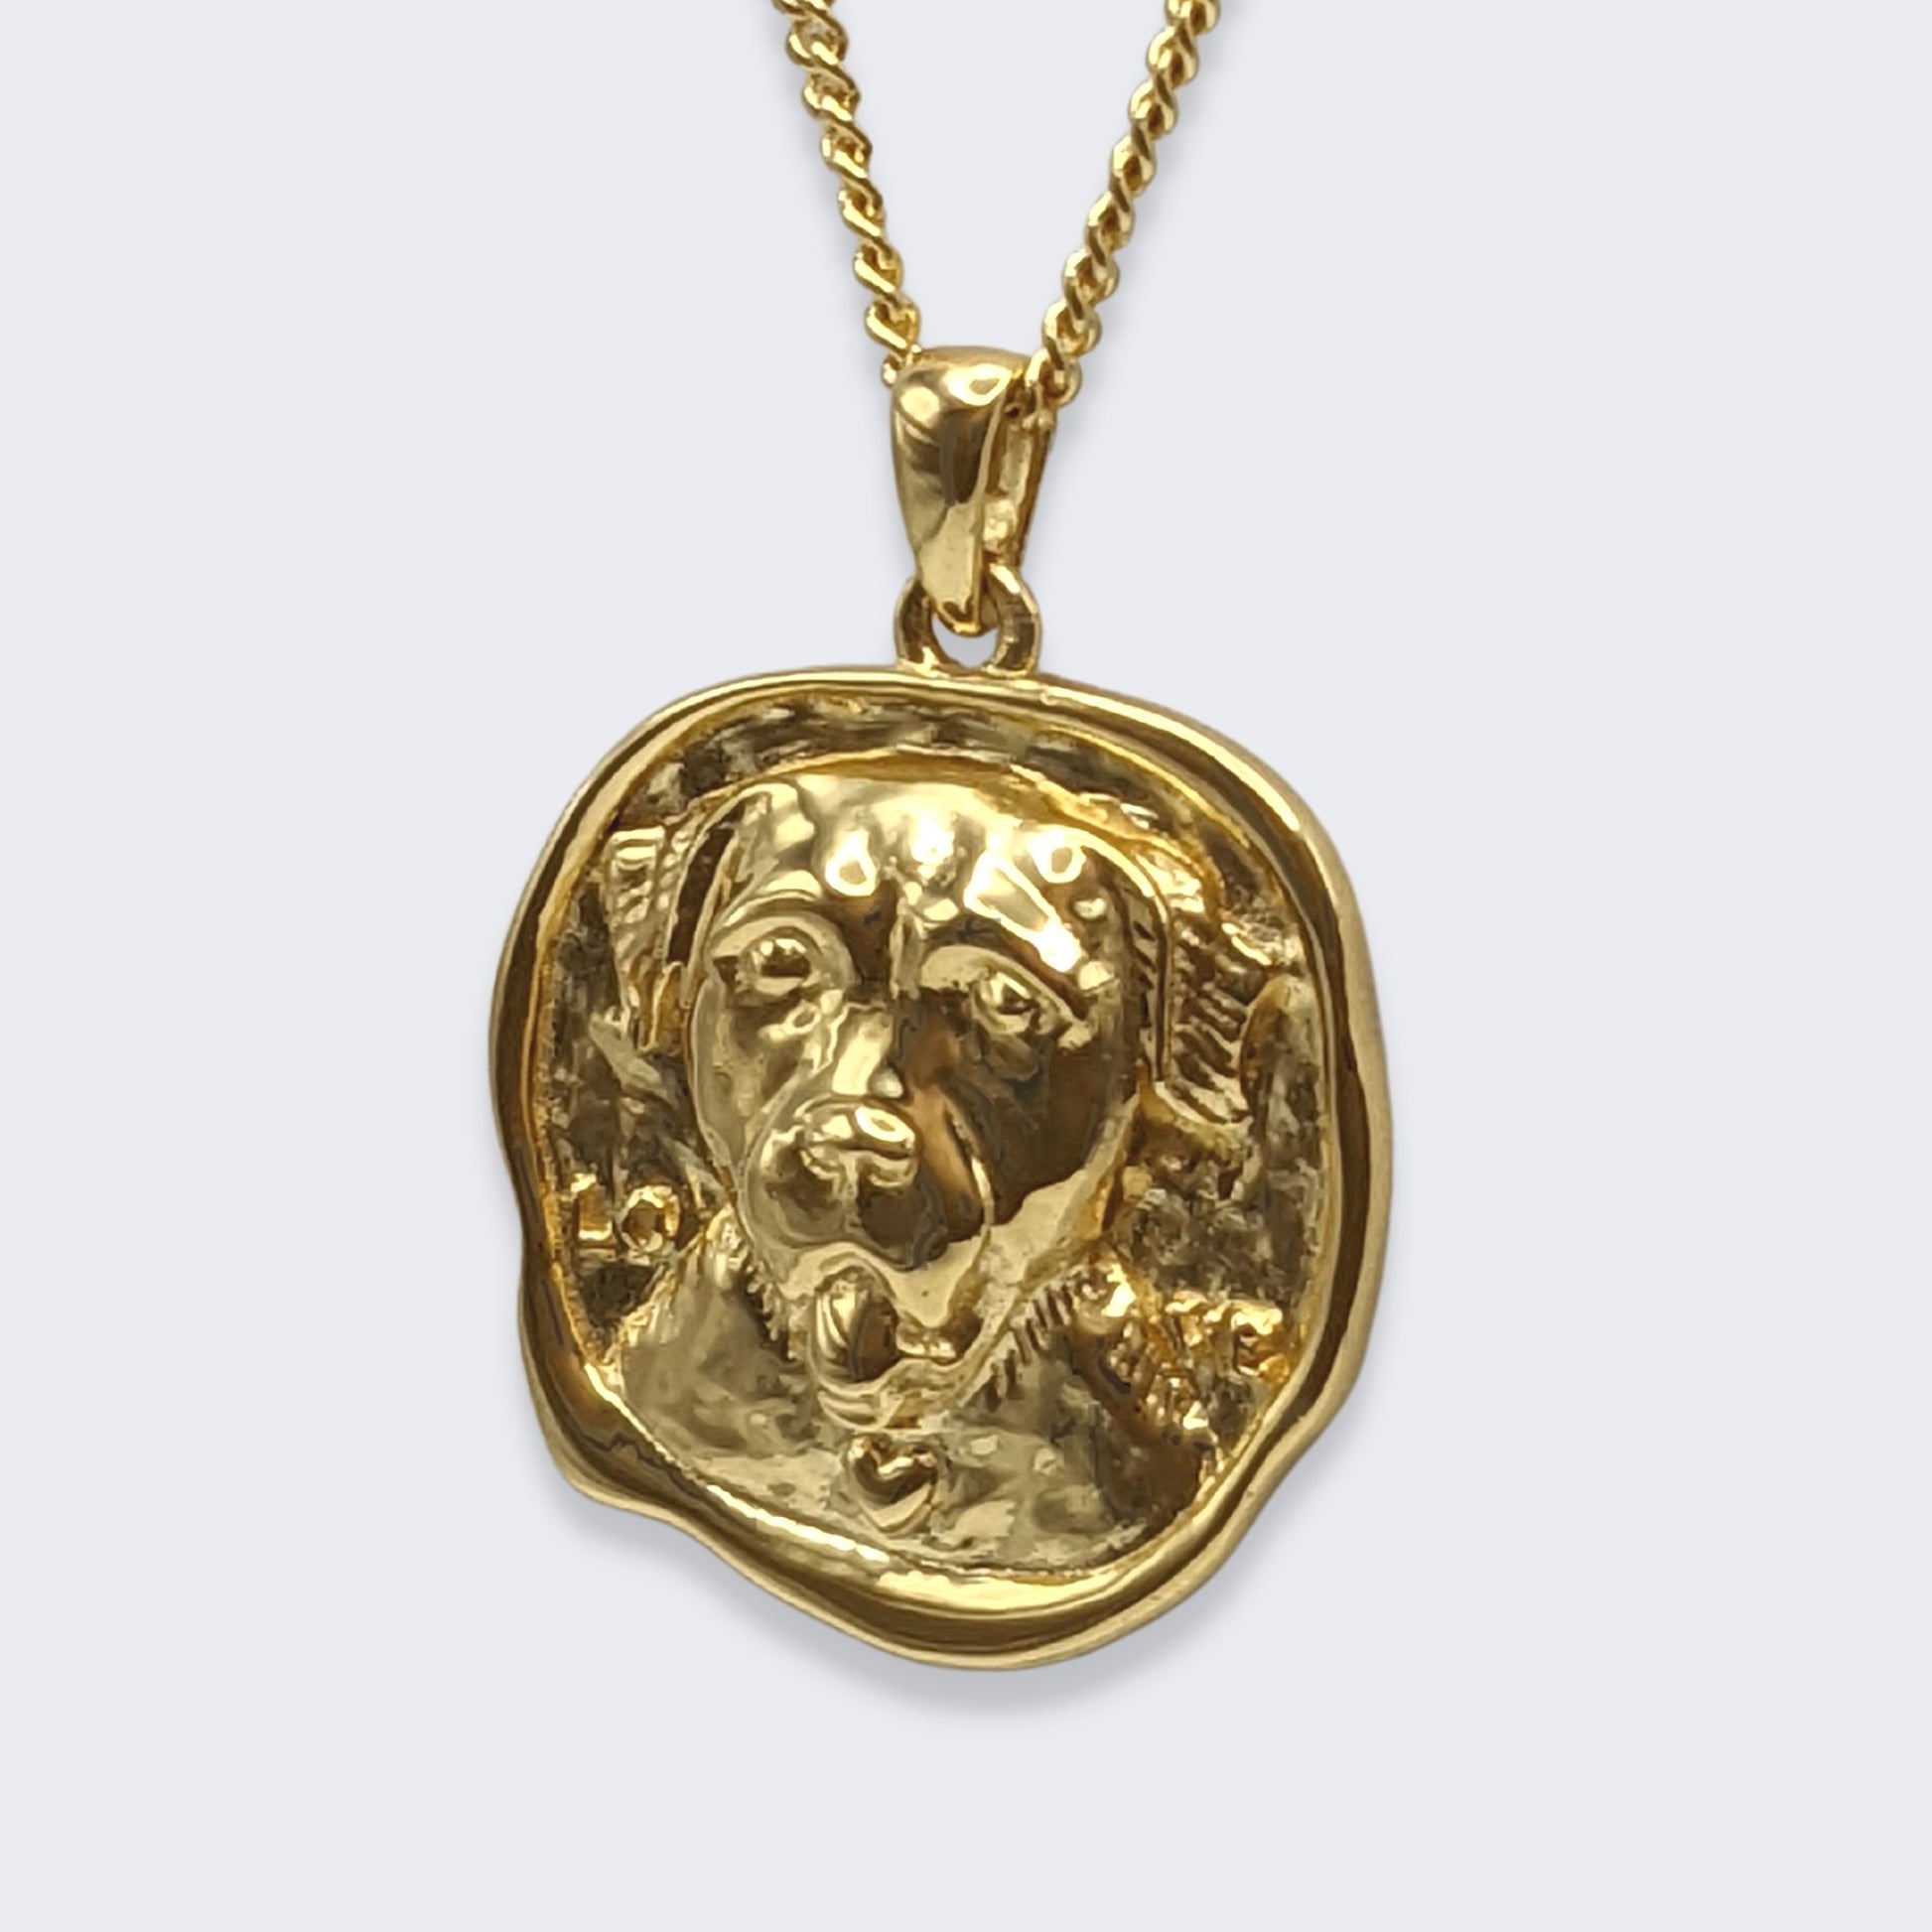 lars dog coin necklace in 18k gold vermeil (left side view)